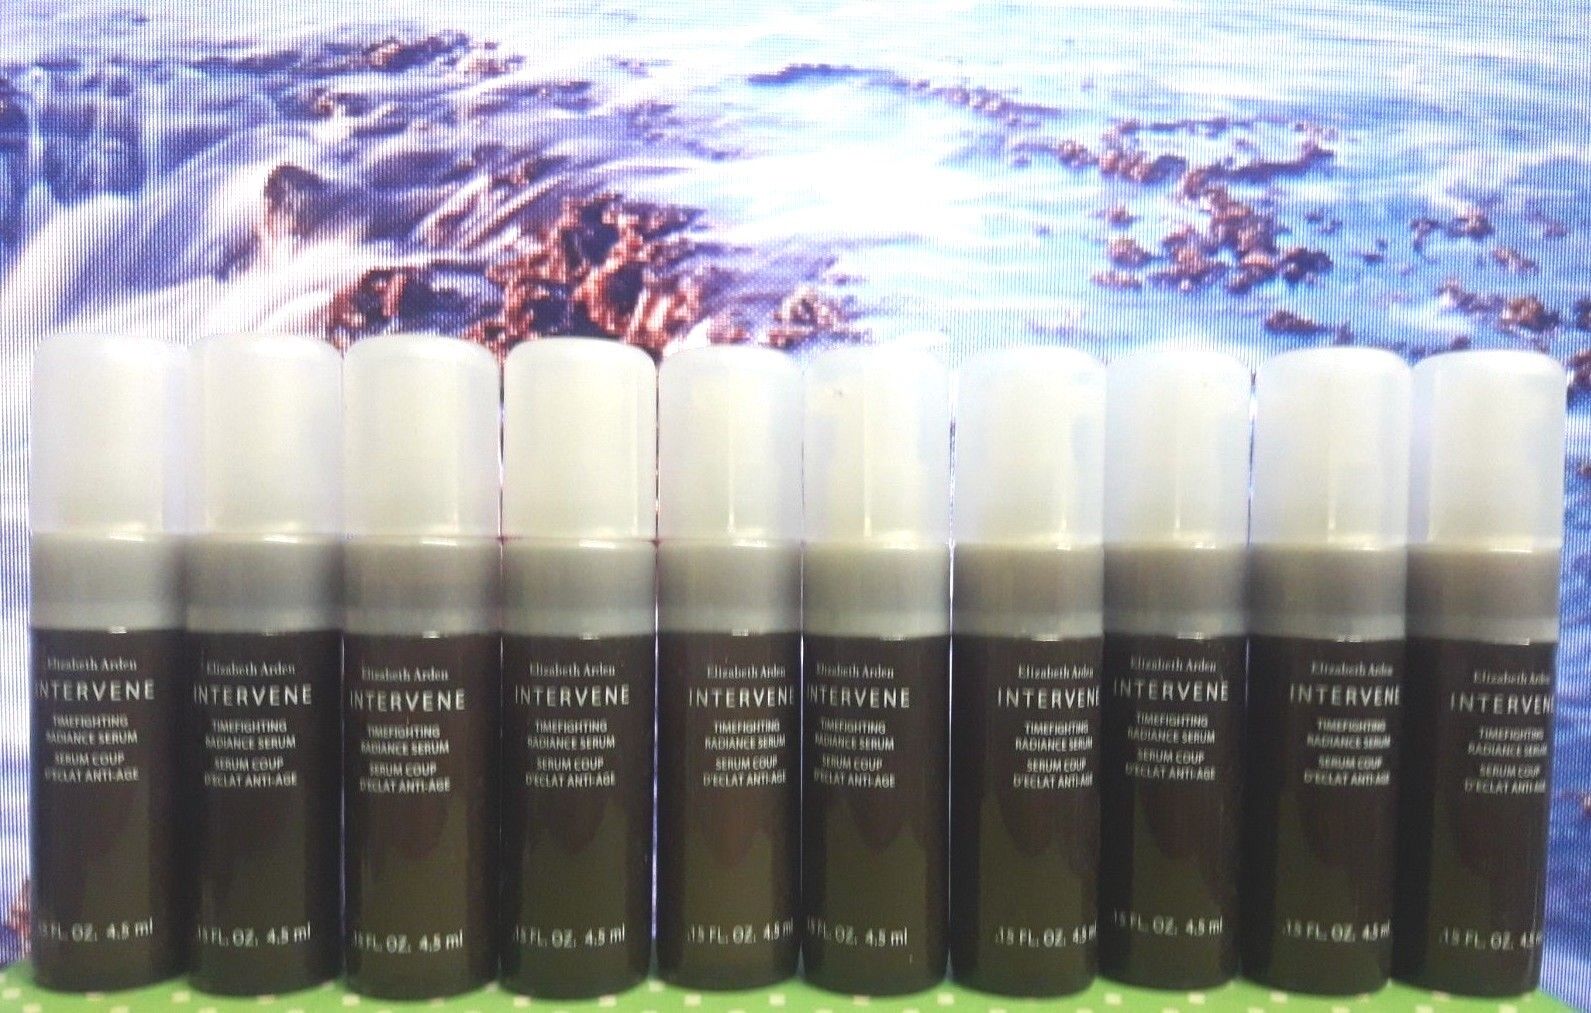 timefighters anti aging formula)